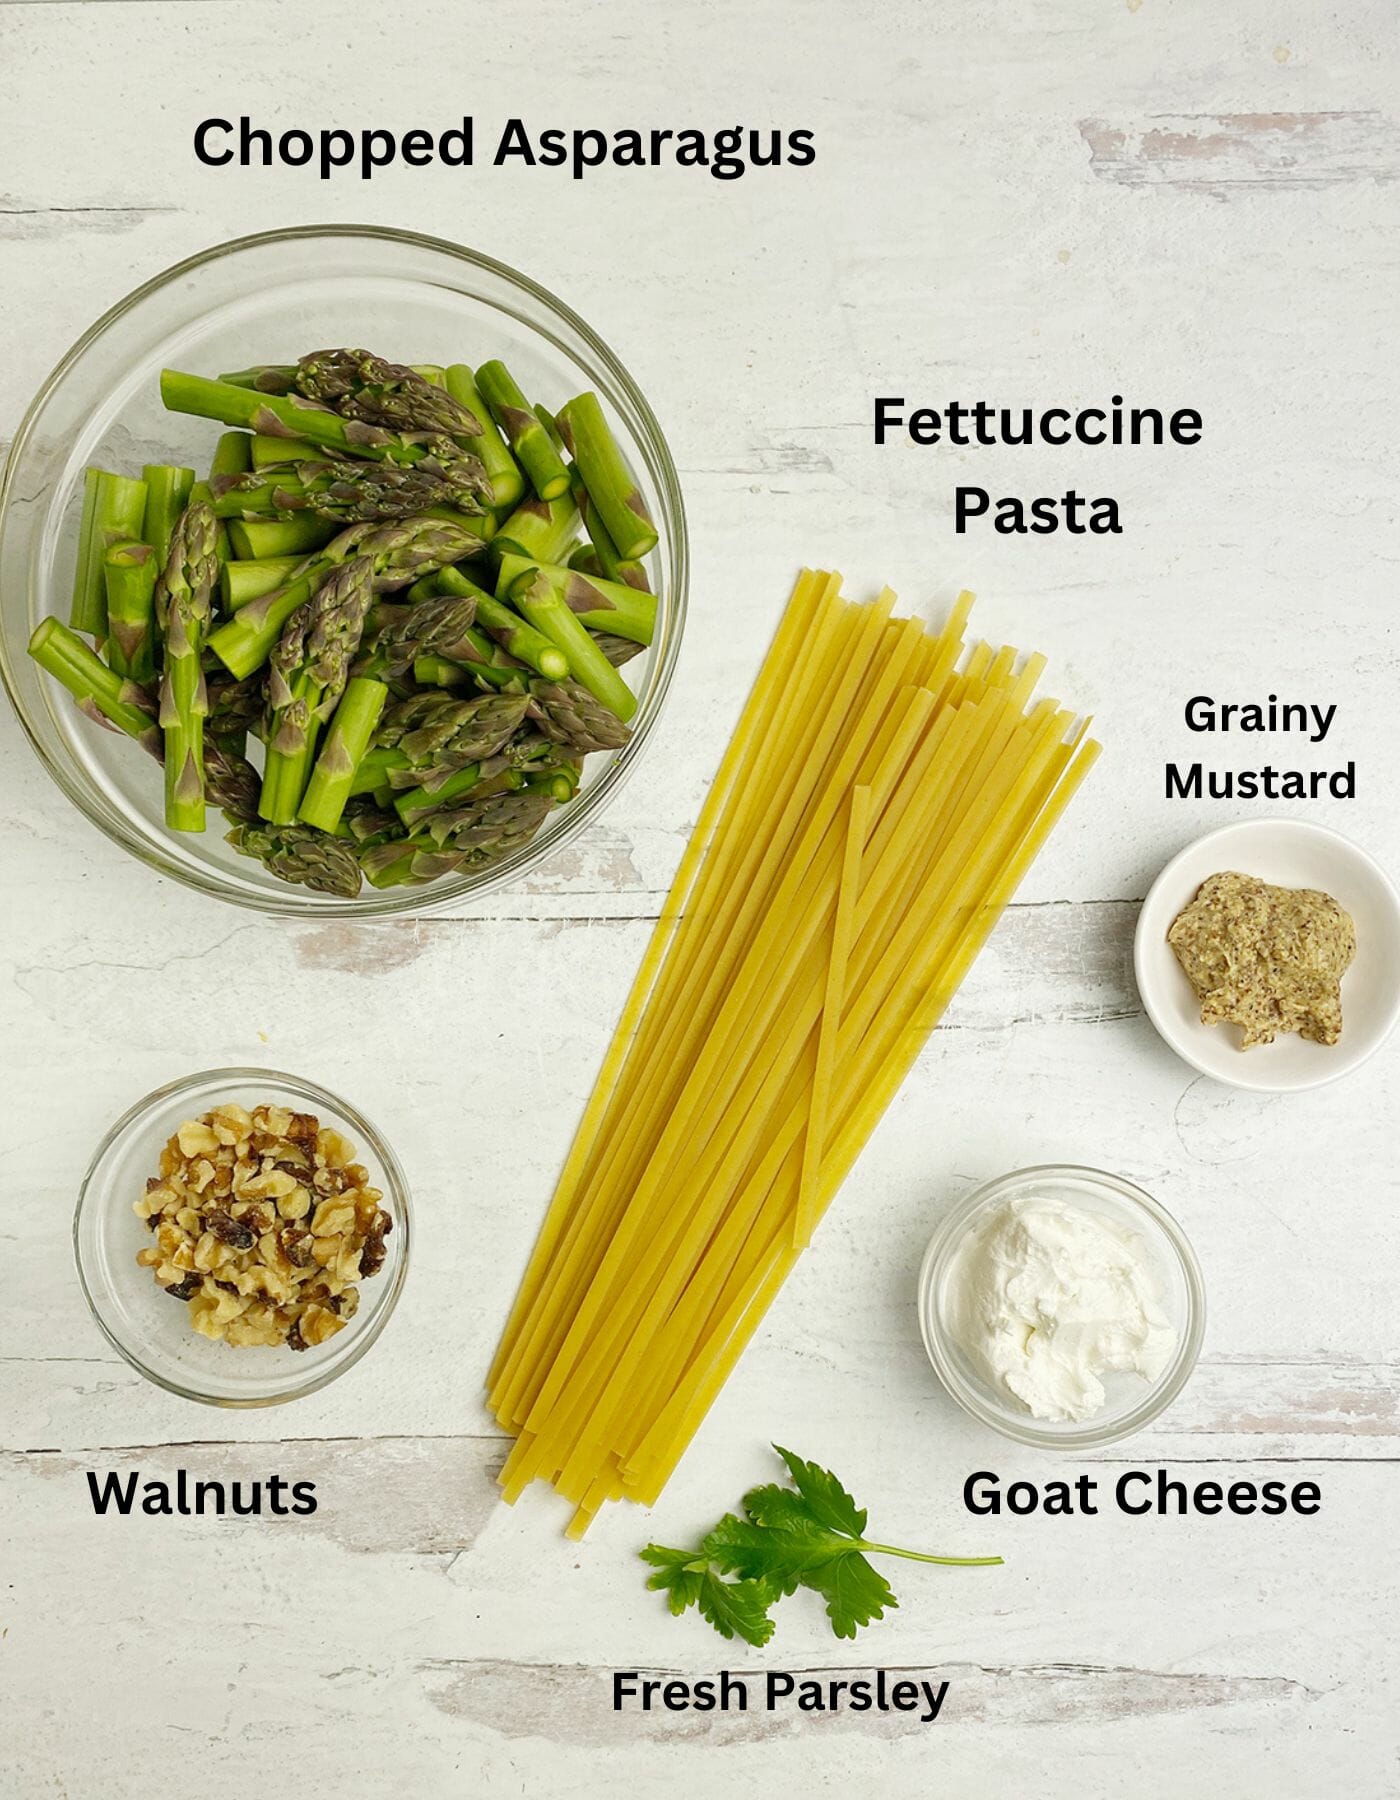 Pasta with Asparagus and Goat Cheese ingredients